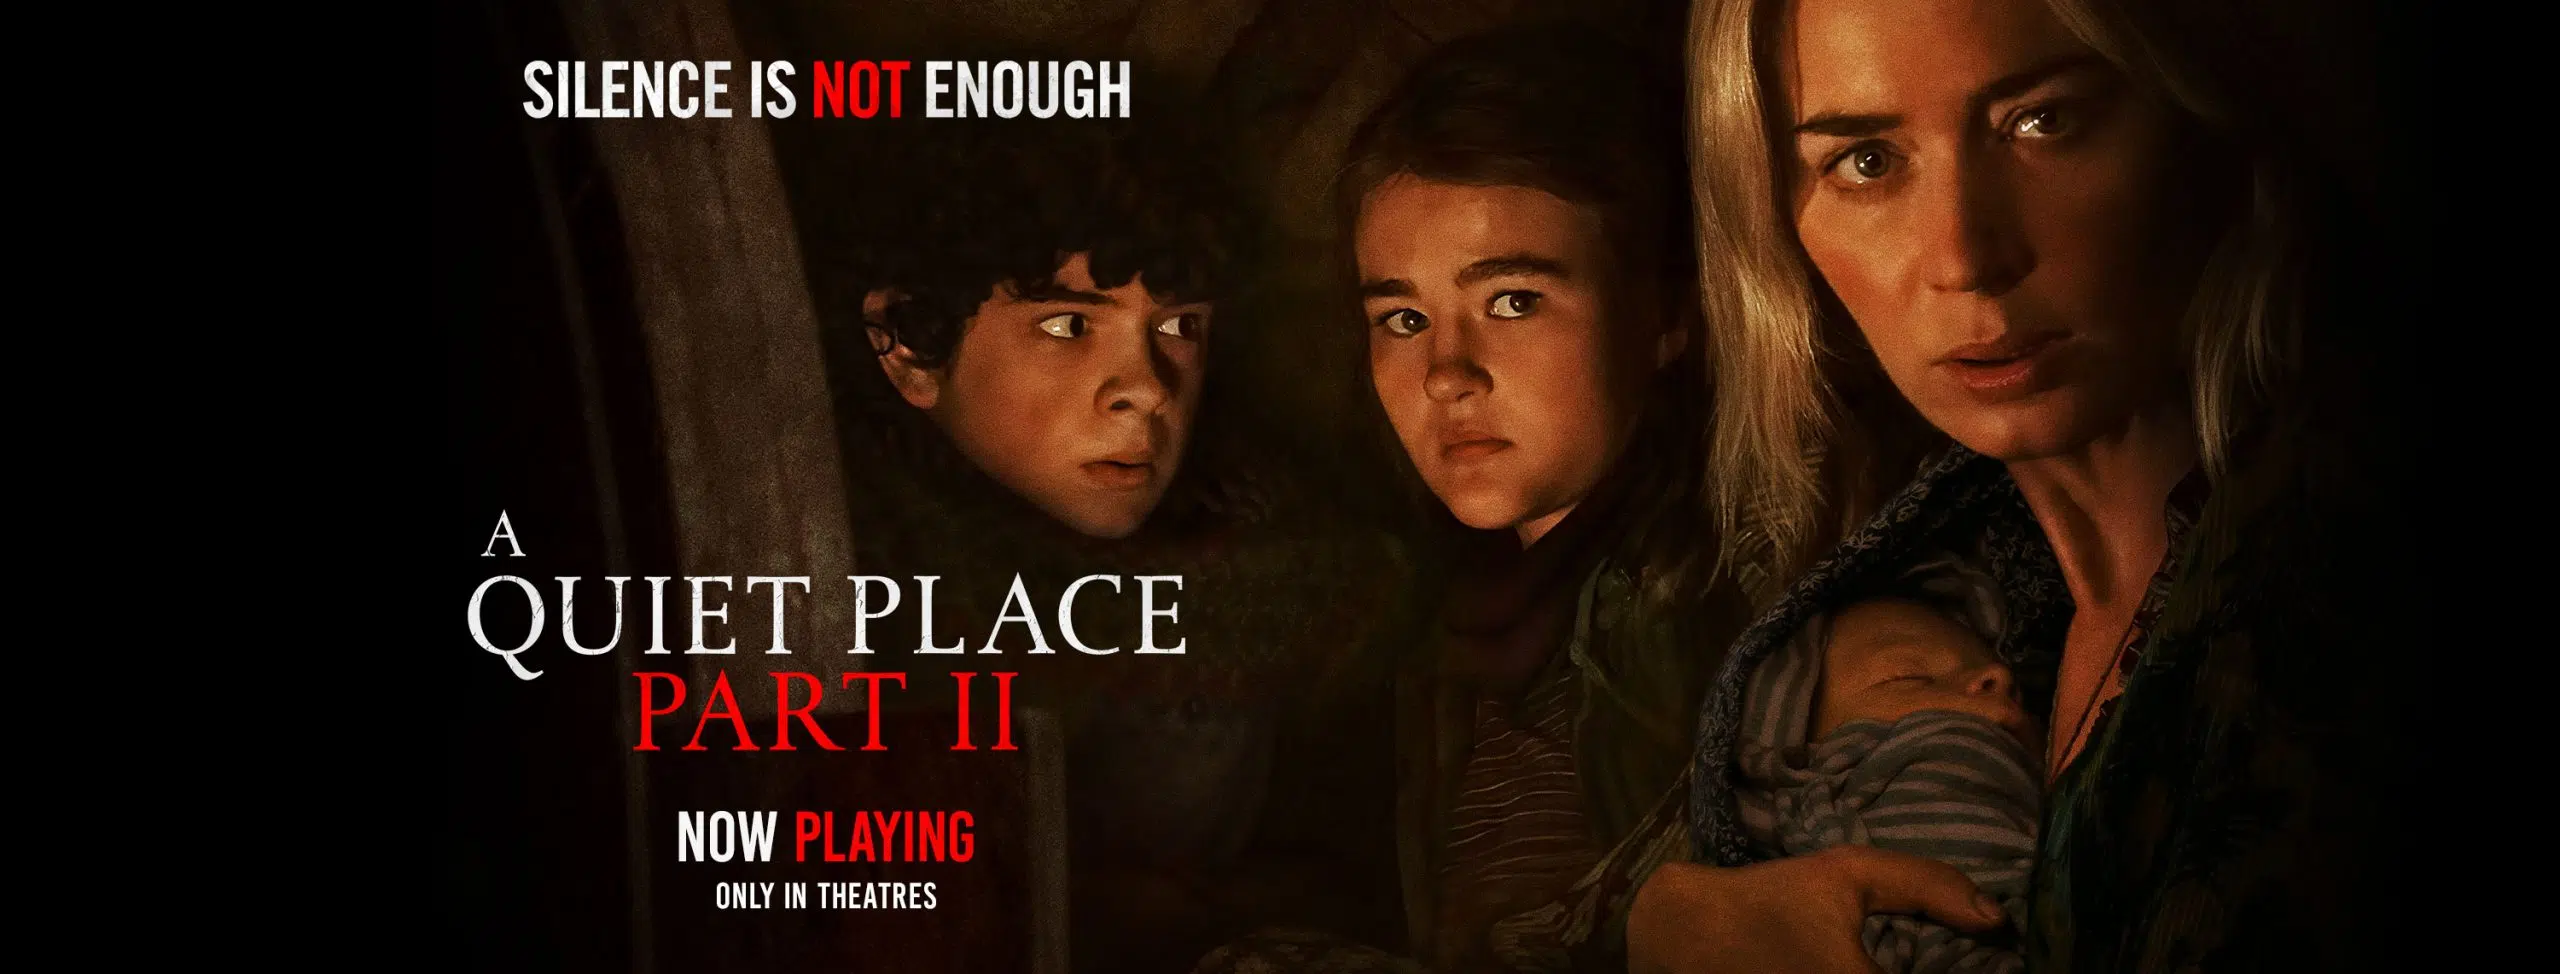 "A Quiet Place 3" Set For Release In 2023